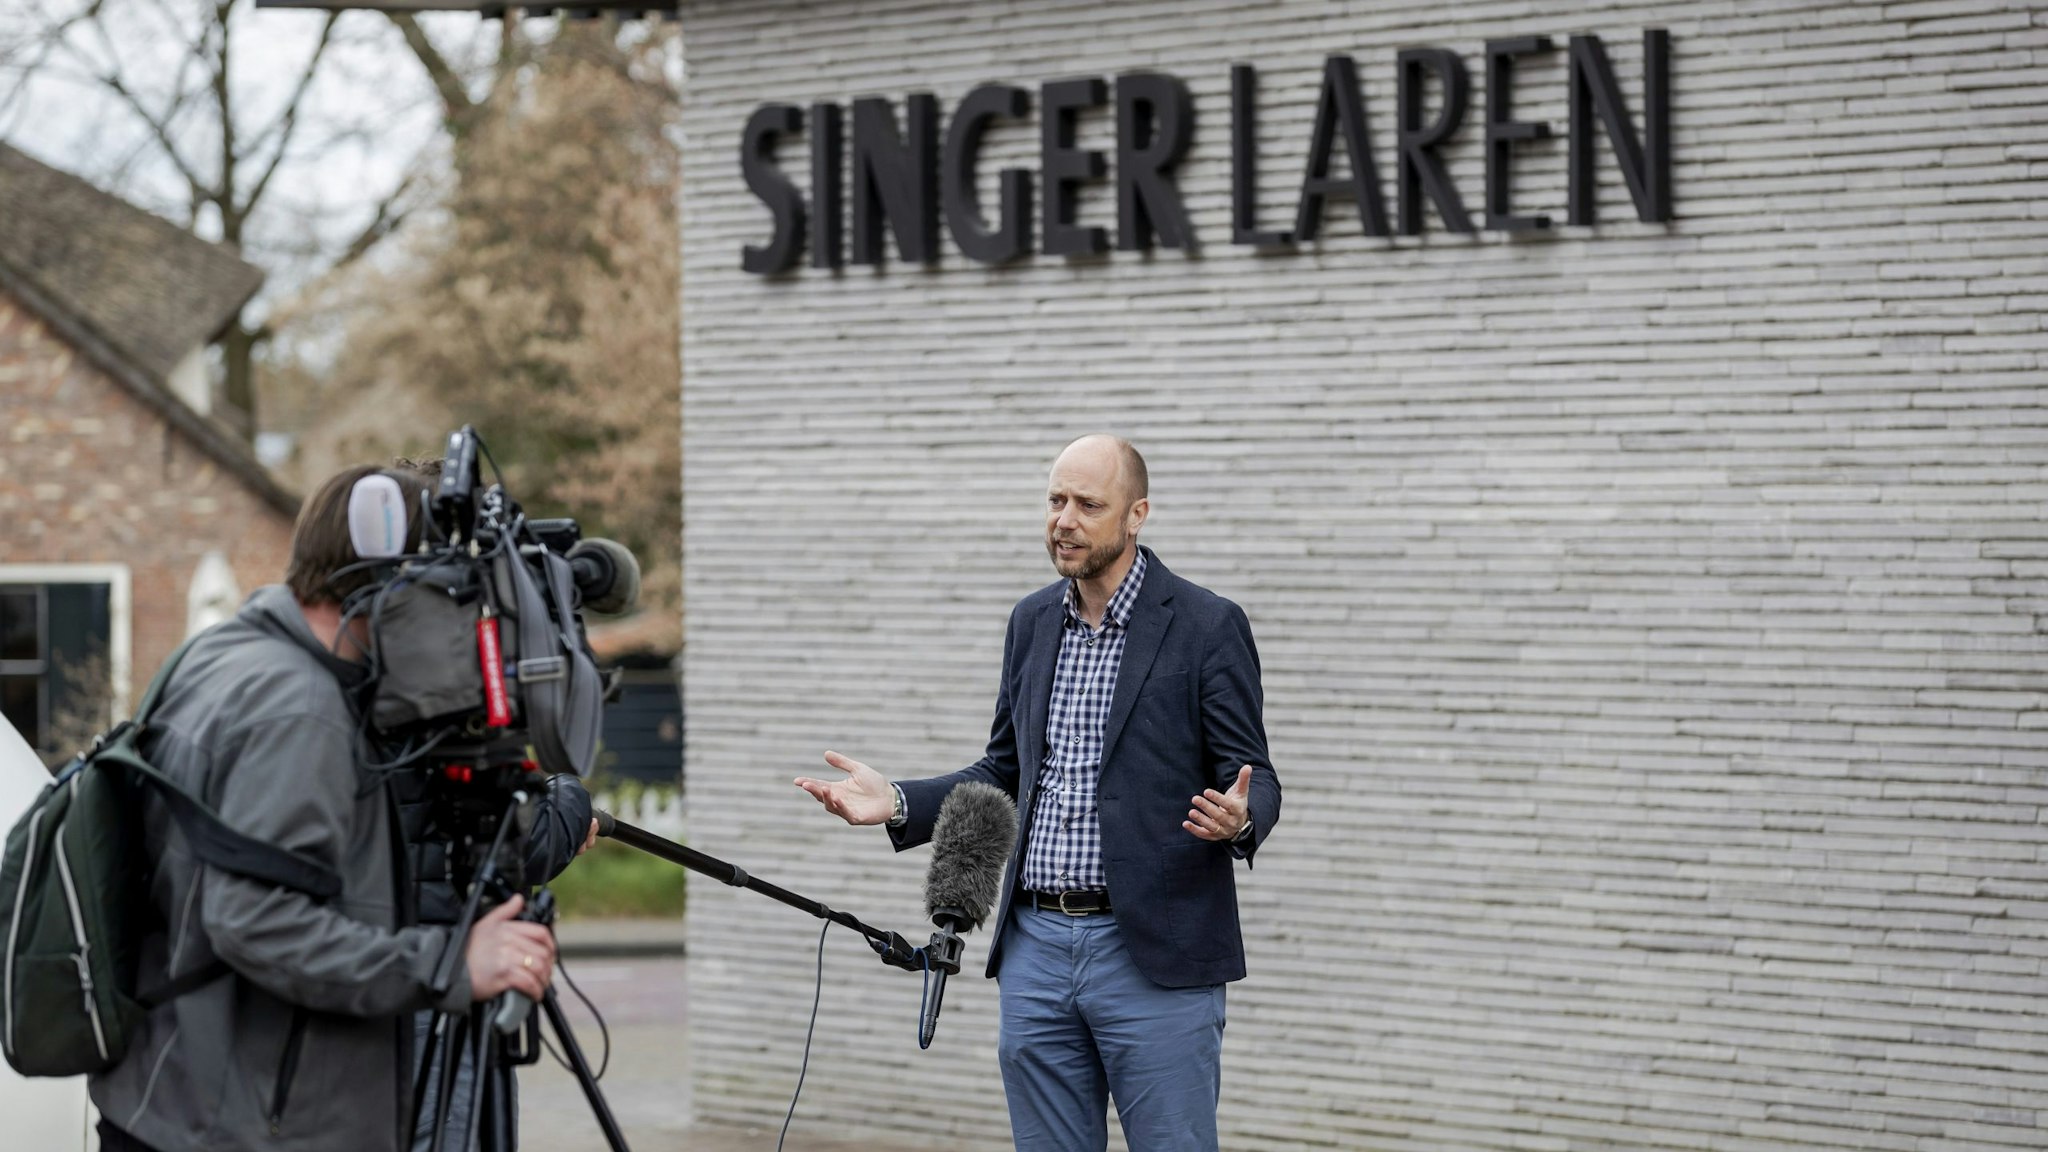 Singer Laren Museum Evert van Os speaks to the press outside the museum on March 30, 2020 in Laren, about 30 kilometres southeast of Amsterdam, closed to the public because of the COVID-19 pandemic, after th 1884 painting by Vincent van Gogh "Parsonage Garden at Neunen in Spring" was stolen. - The painting has an estimated value of between one to six million euros, local media said. The criminals entered the museum at around 3.15 am (0115 GMT) by breaking open a front glass door, police and Dutch news reports said. (Photo by Robin VAN LONKHUIJSEN / ANP / AFP) / Netherlands OUT (Photo by ROBIN VAN LONKHUIJSEN/ANP/AFP via Getty Images)